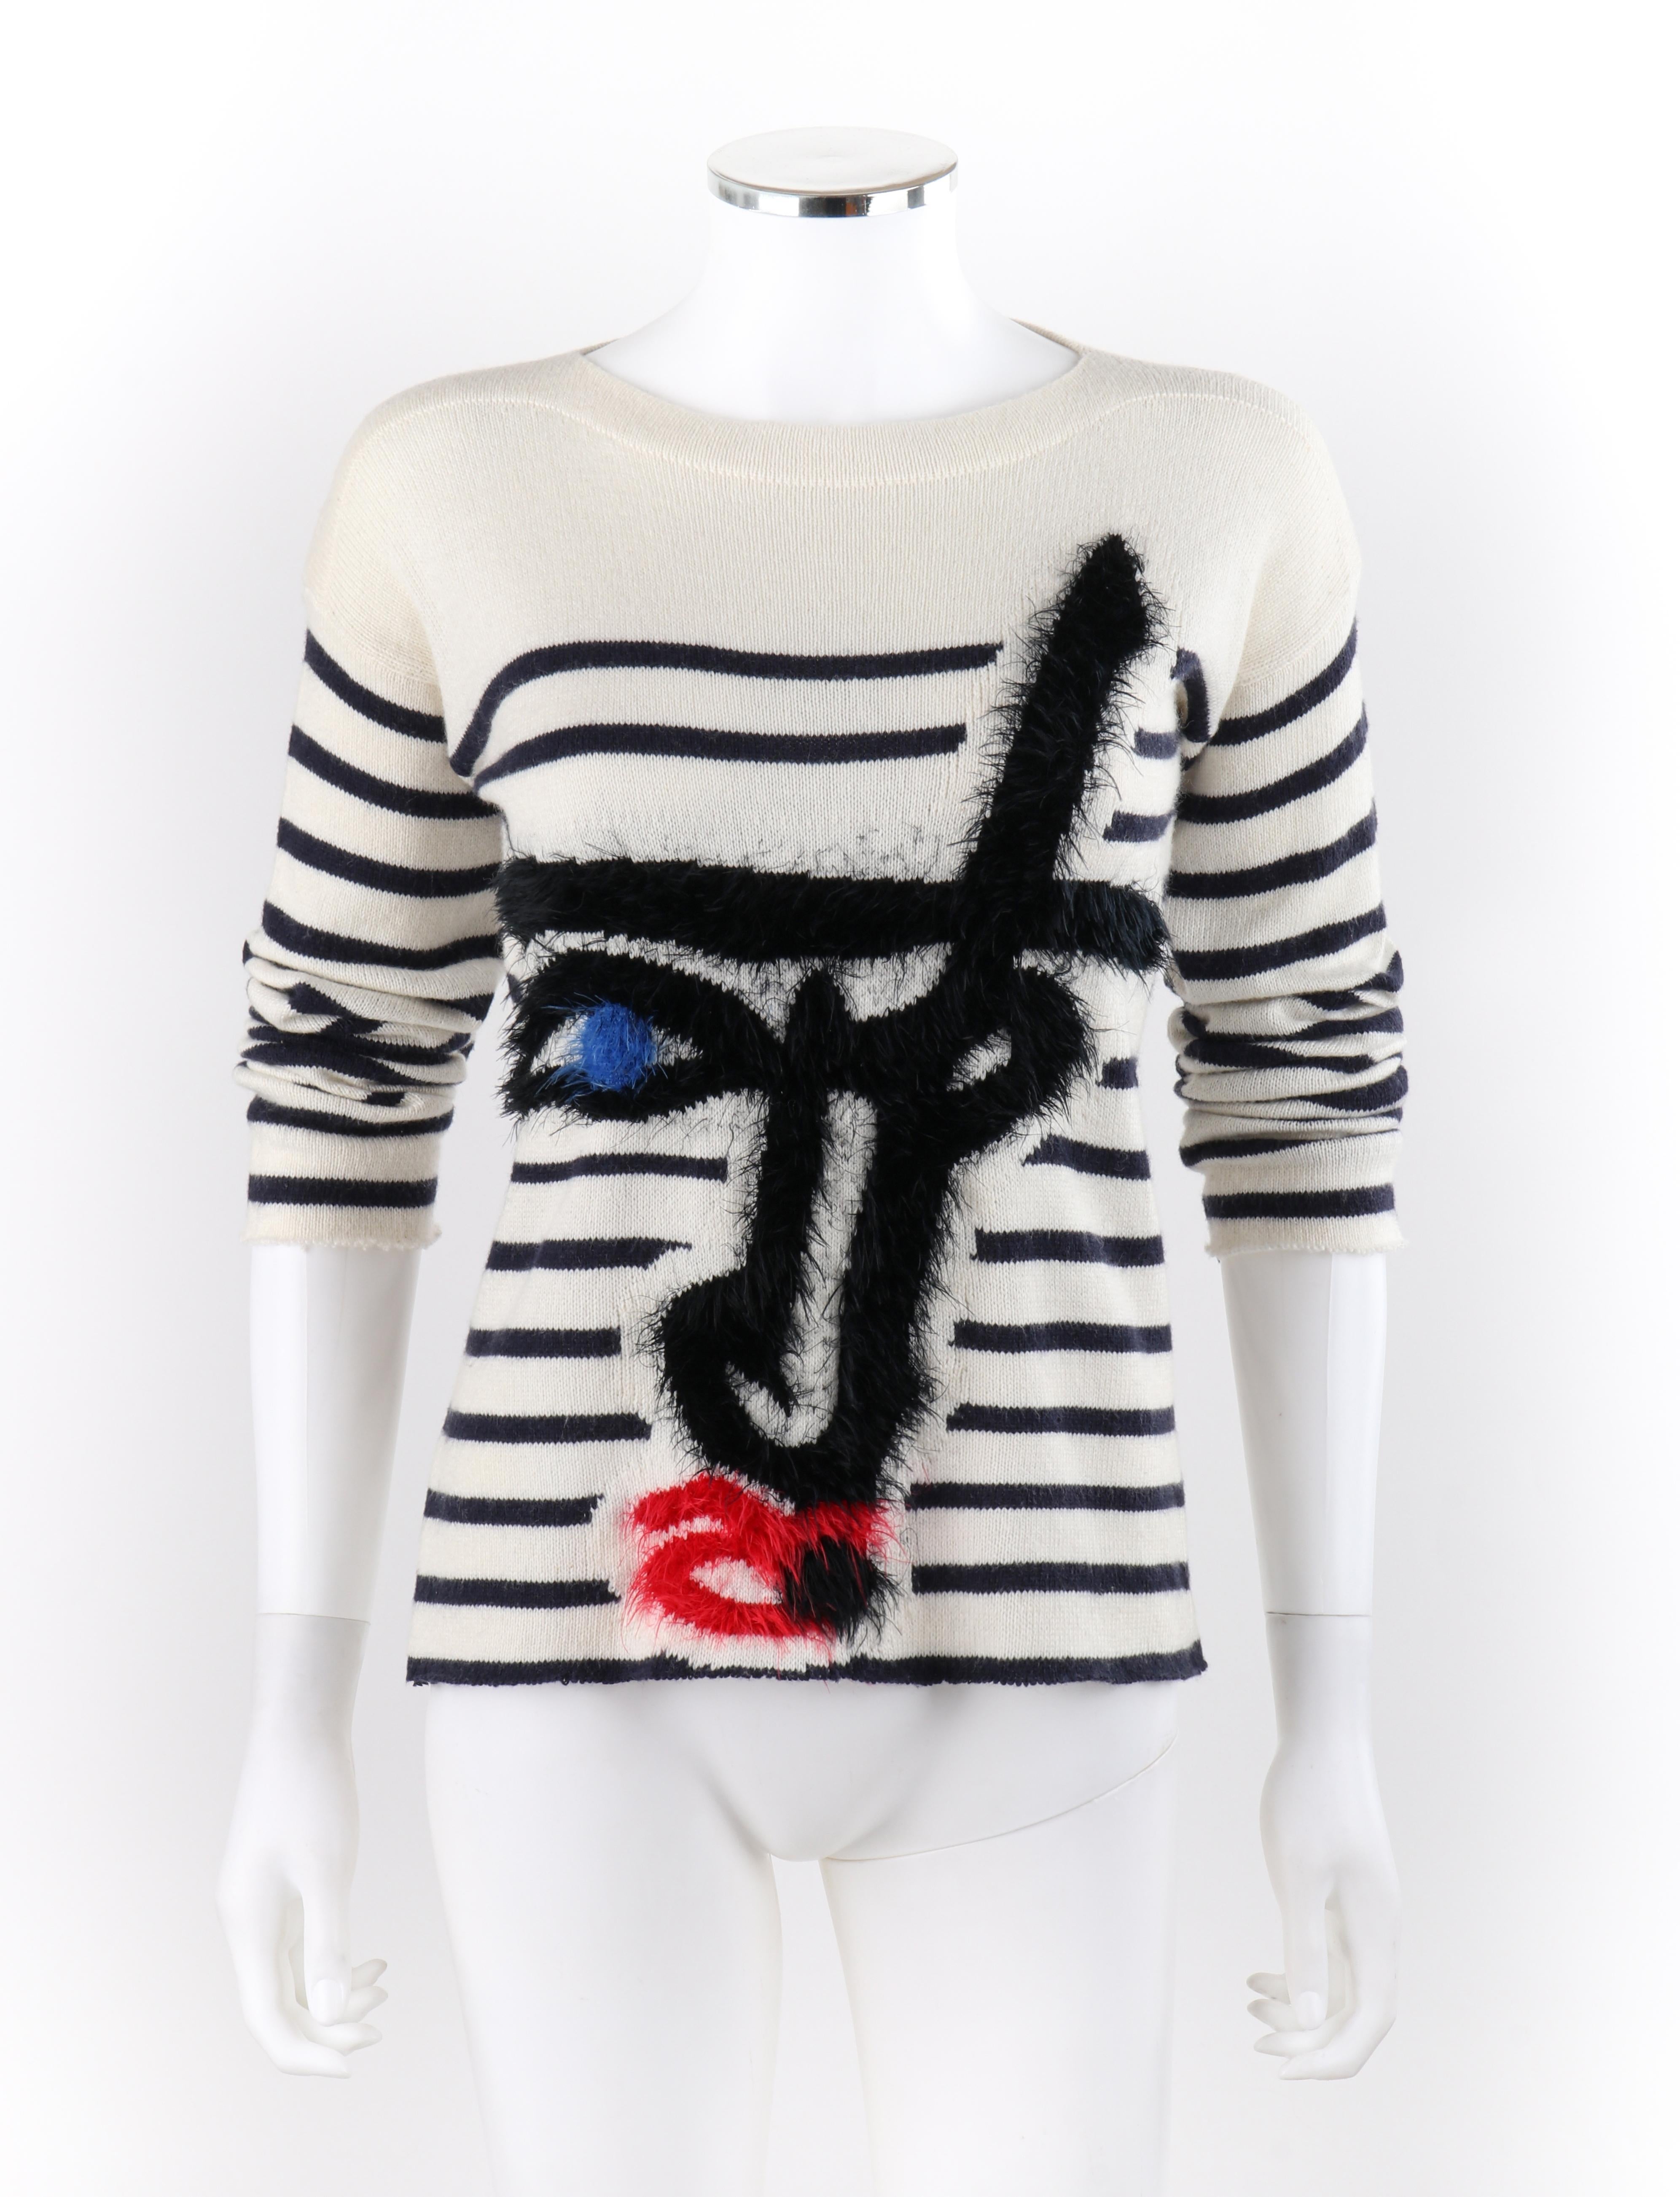 JEAN PAUL GAULTIER x Lindex 2014 Ltd. Ed. Stripe Picasso Face Pattern Sweater
 
Brand / Manufacturer: Jean Paul Gaultier
Collection: Jean Paul Gaultier x Lindex 2014
Designer: Jean Paul Gaultier
Style: Pullover sweater
Color(s): Shades of black,